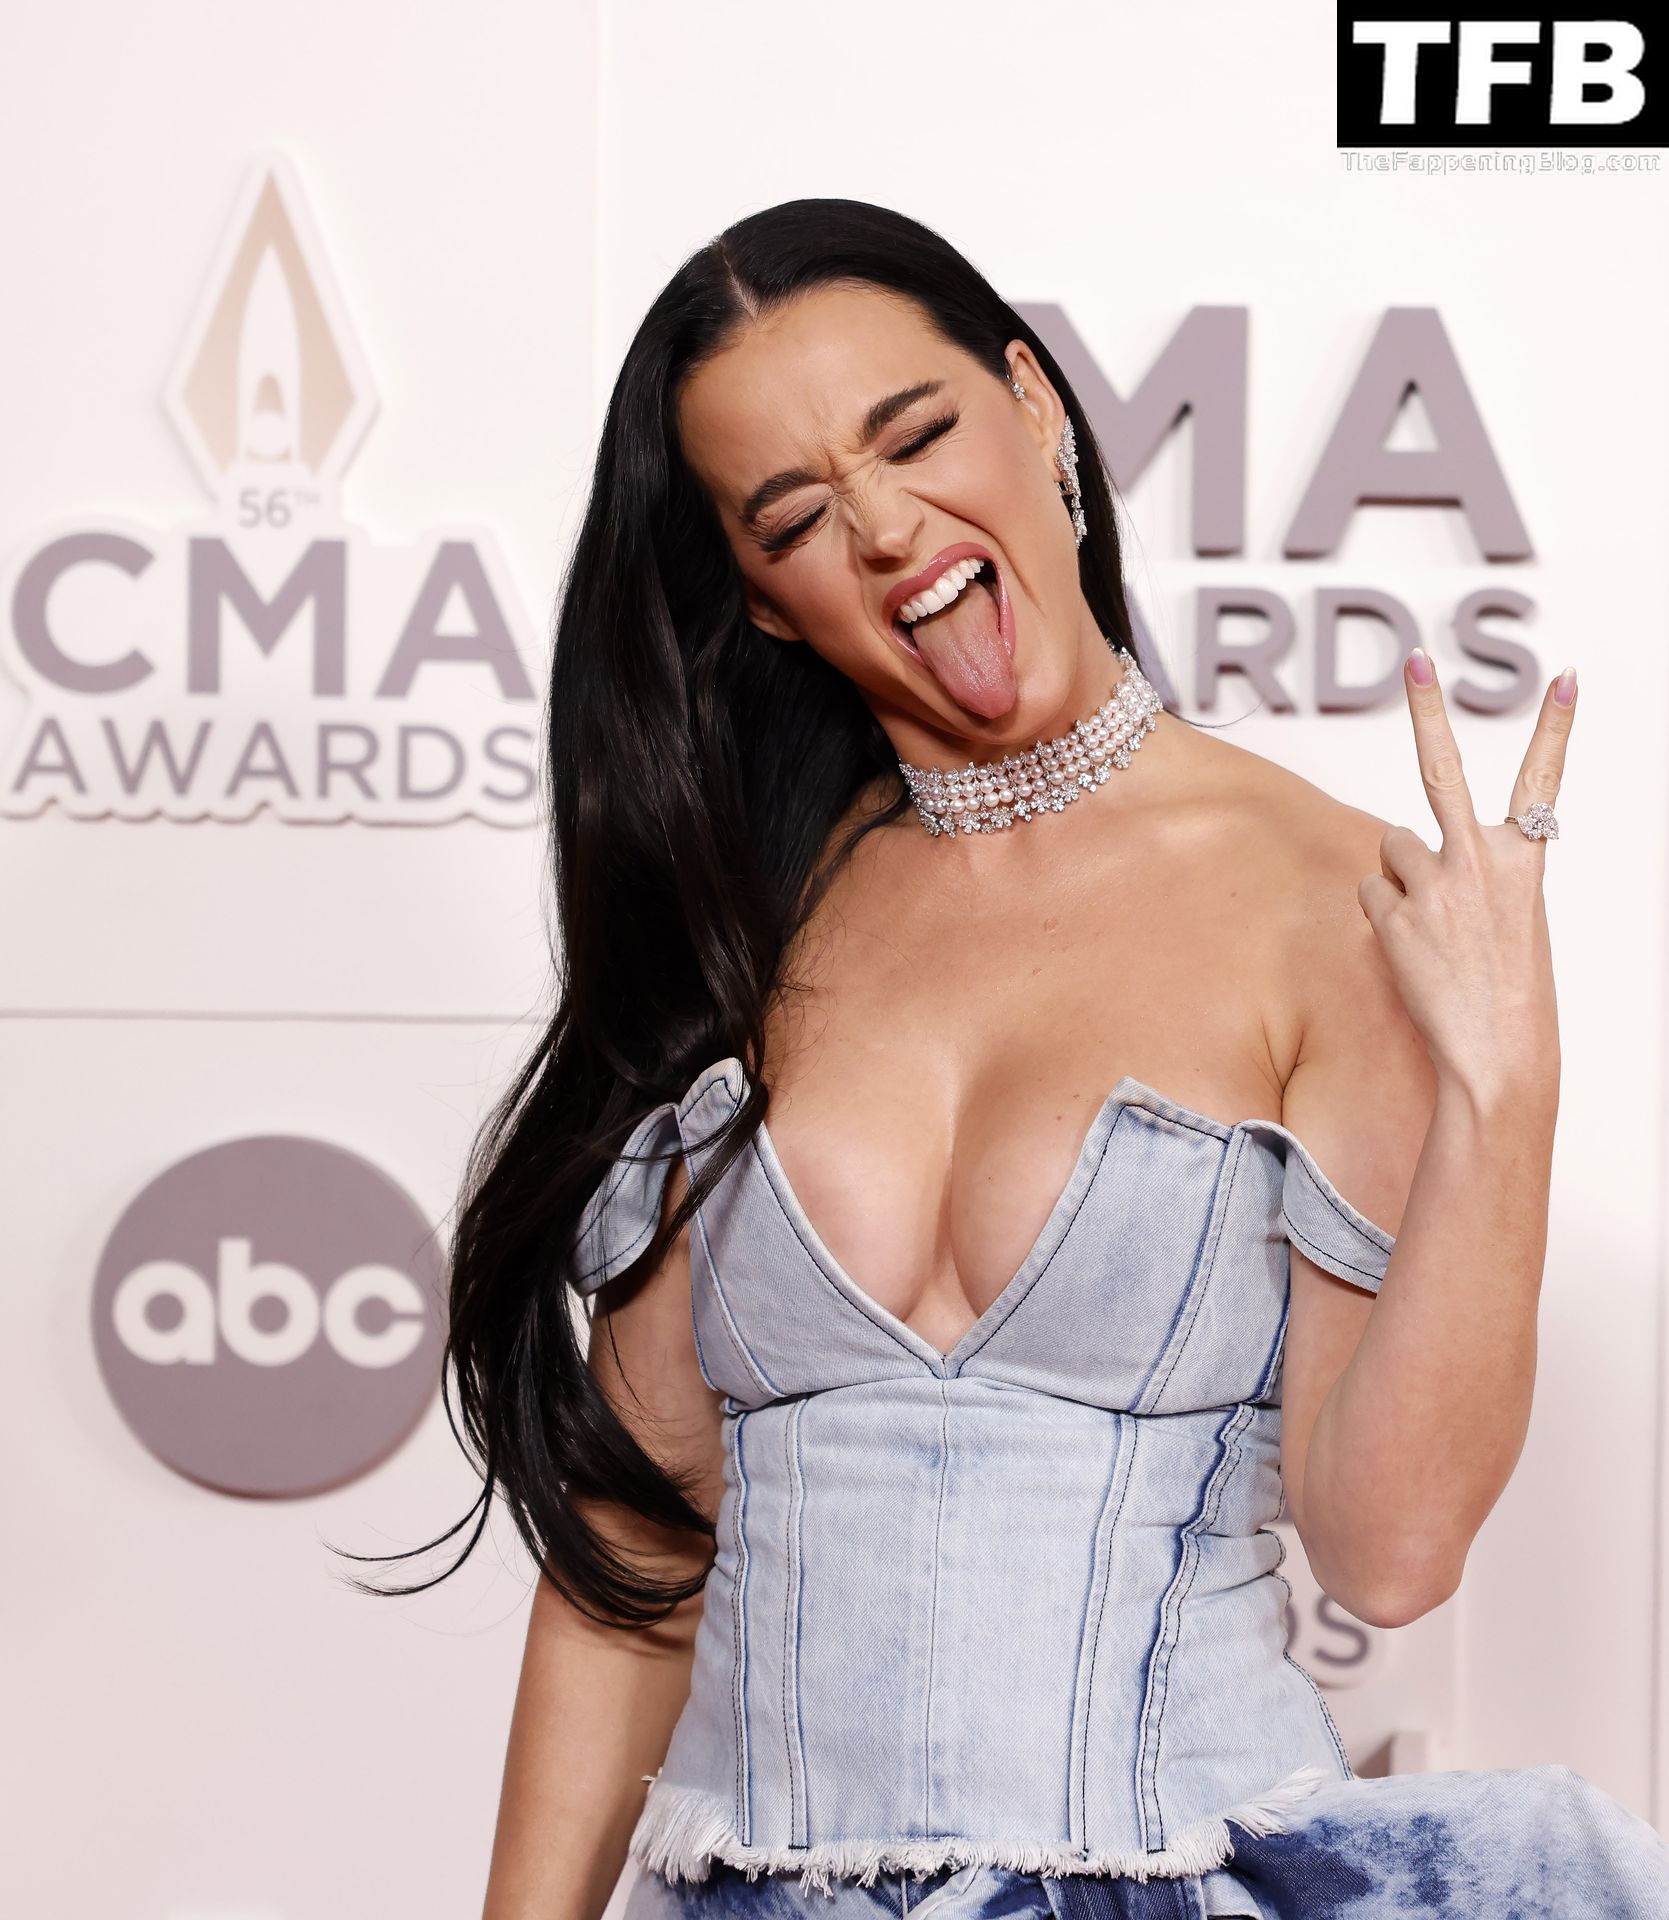 Katy Perry Sexy The Fappening Blog 1 - Katy Perry Shows Off Her Sexy Boobs at the 56th Annual CMA Awards (27 Photos)